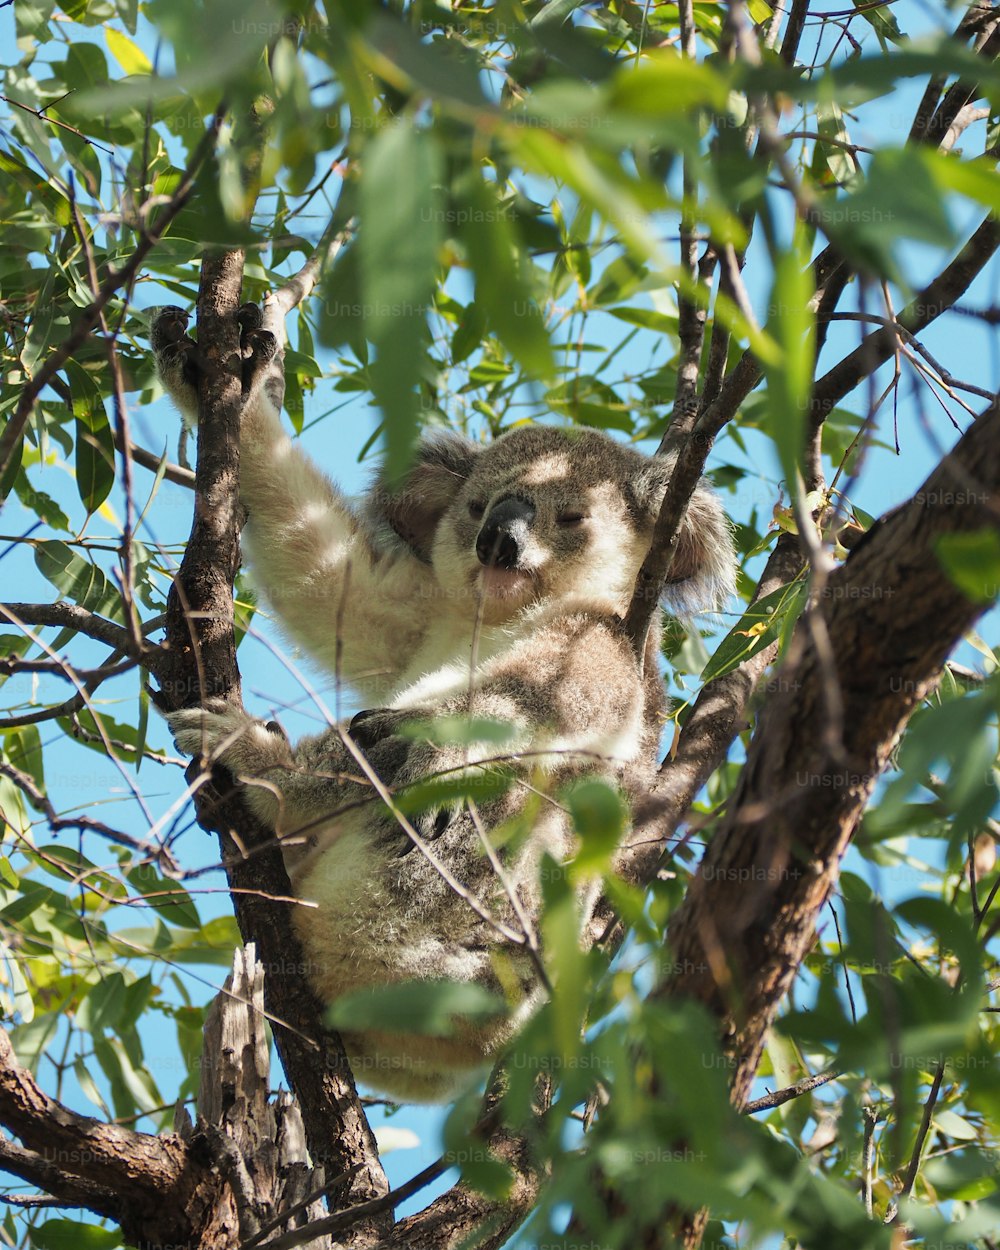 a koala is sitting in a tree and looking at the camera